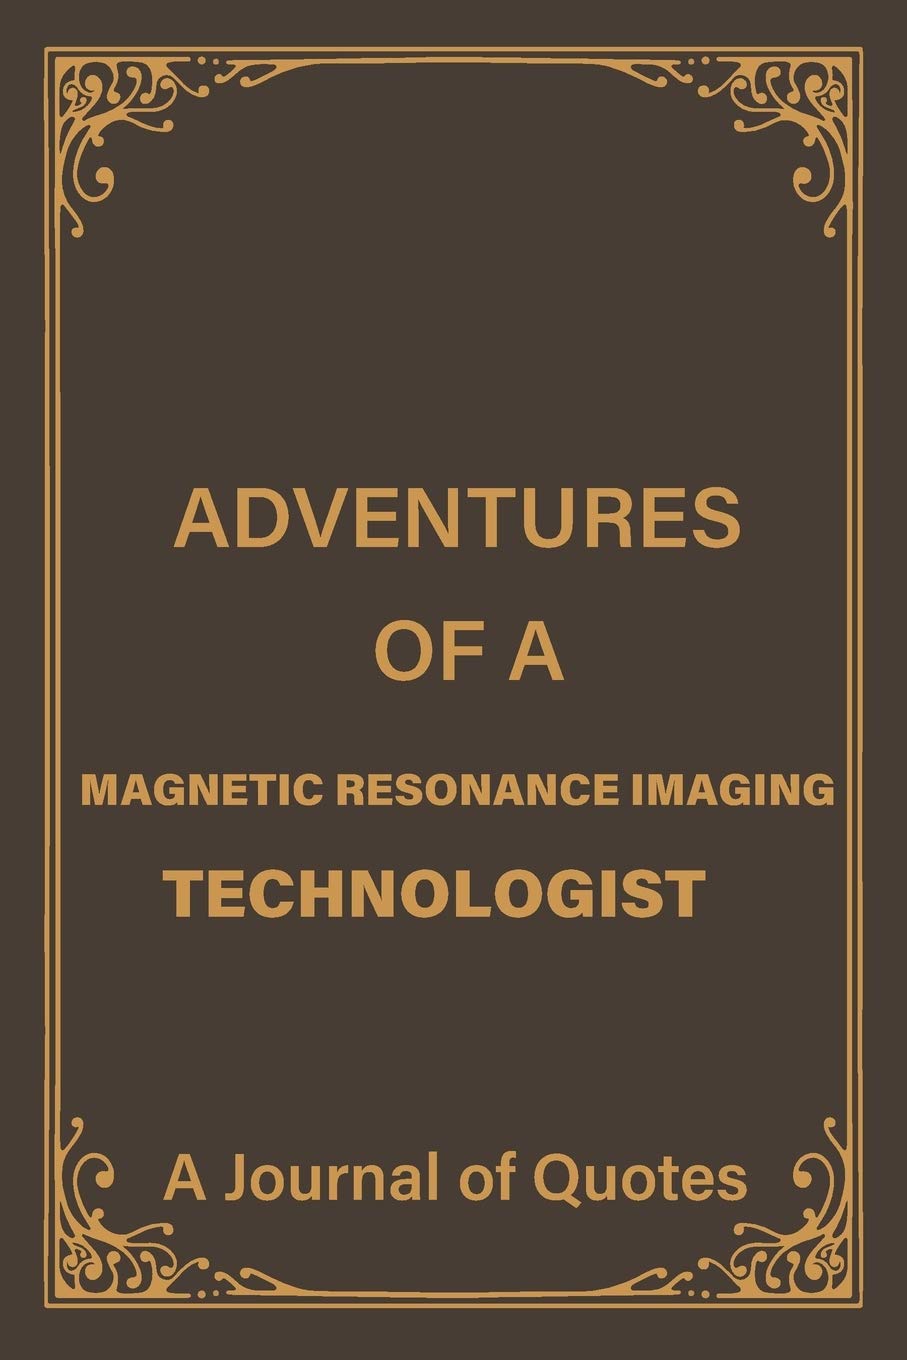 Adventures of a Magnetic Resonance Imaging Technologist: a Blank Lined Journal of Quotes for Magnetic Resonance Imaging Technologist |6inx9in|110 pages|soft and Matt Cover